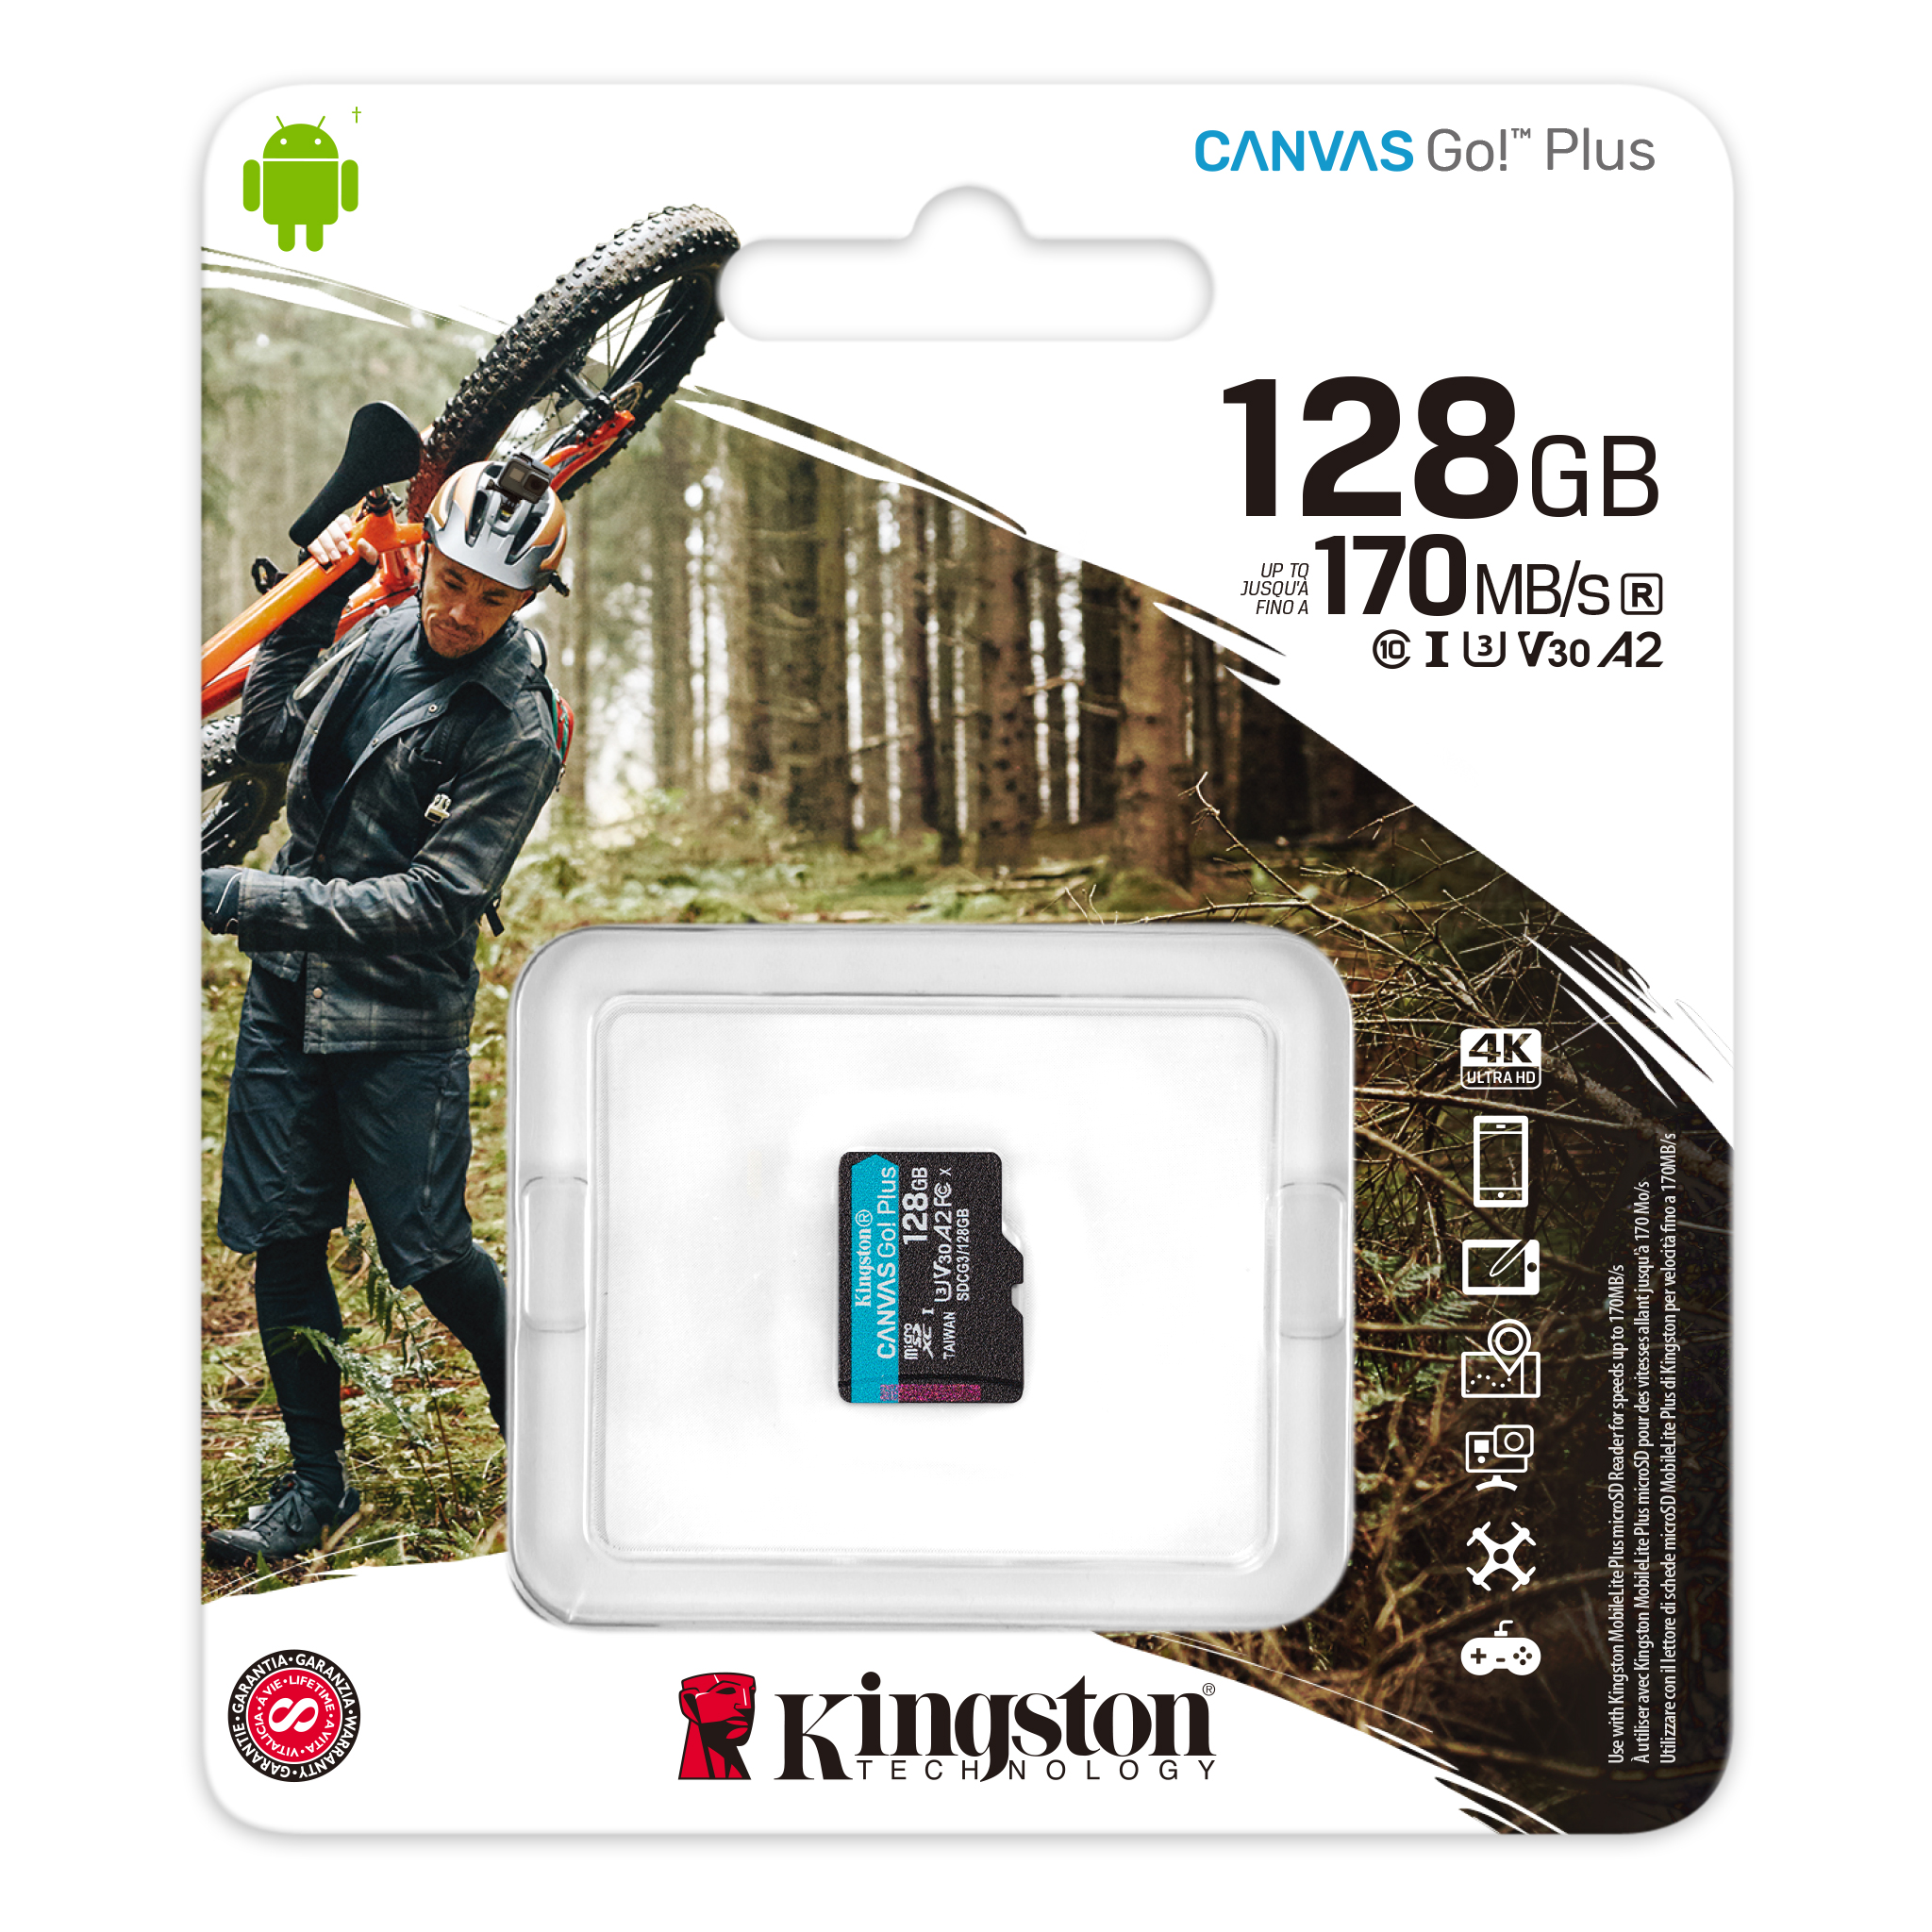 Kingston 32GB LG G6 Plus MicroSDHC Canvas Select Plus Card Verified by SanFlash. 100MBs Works with Kingston